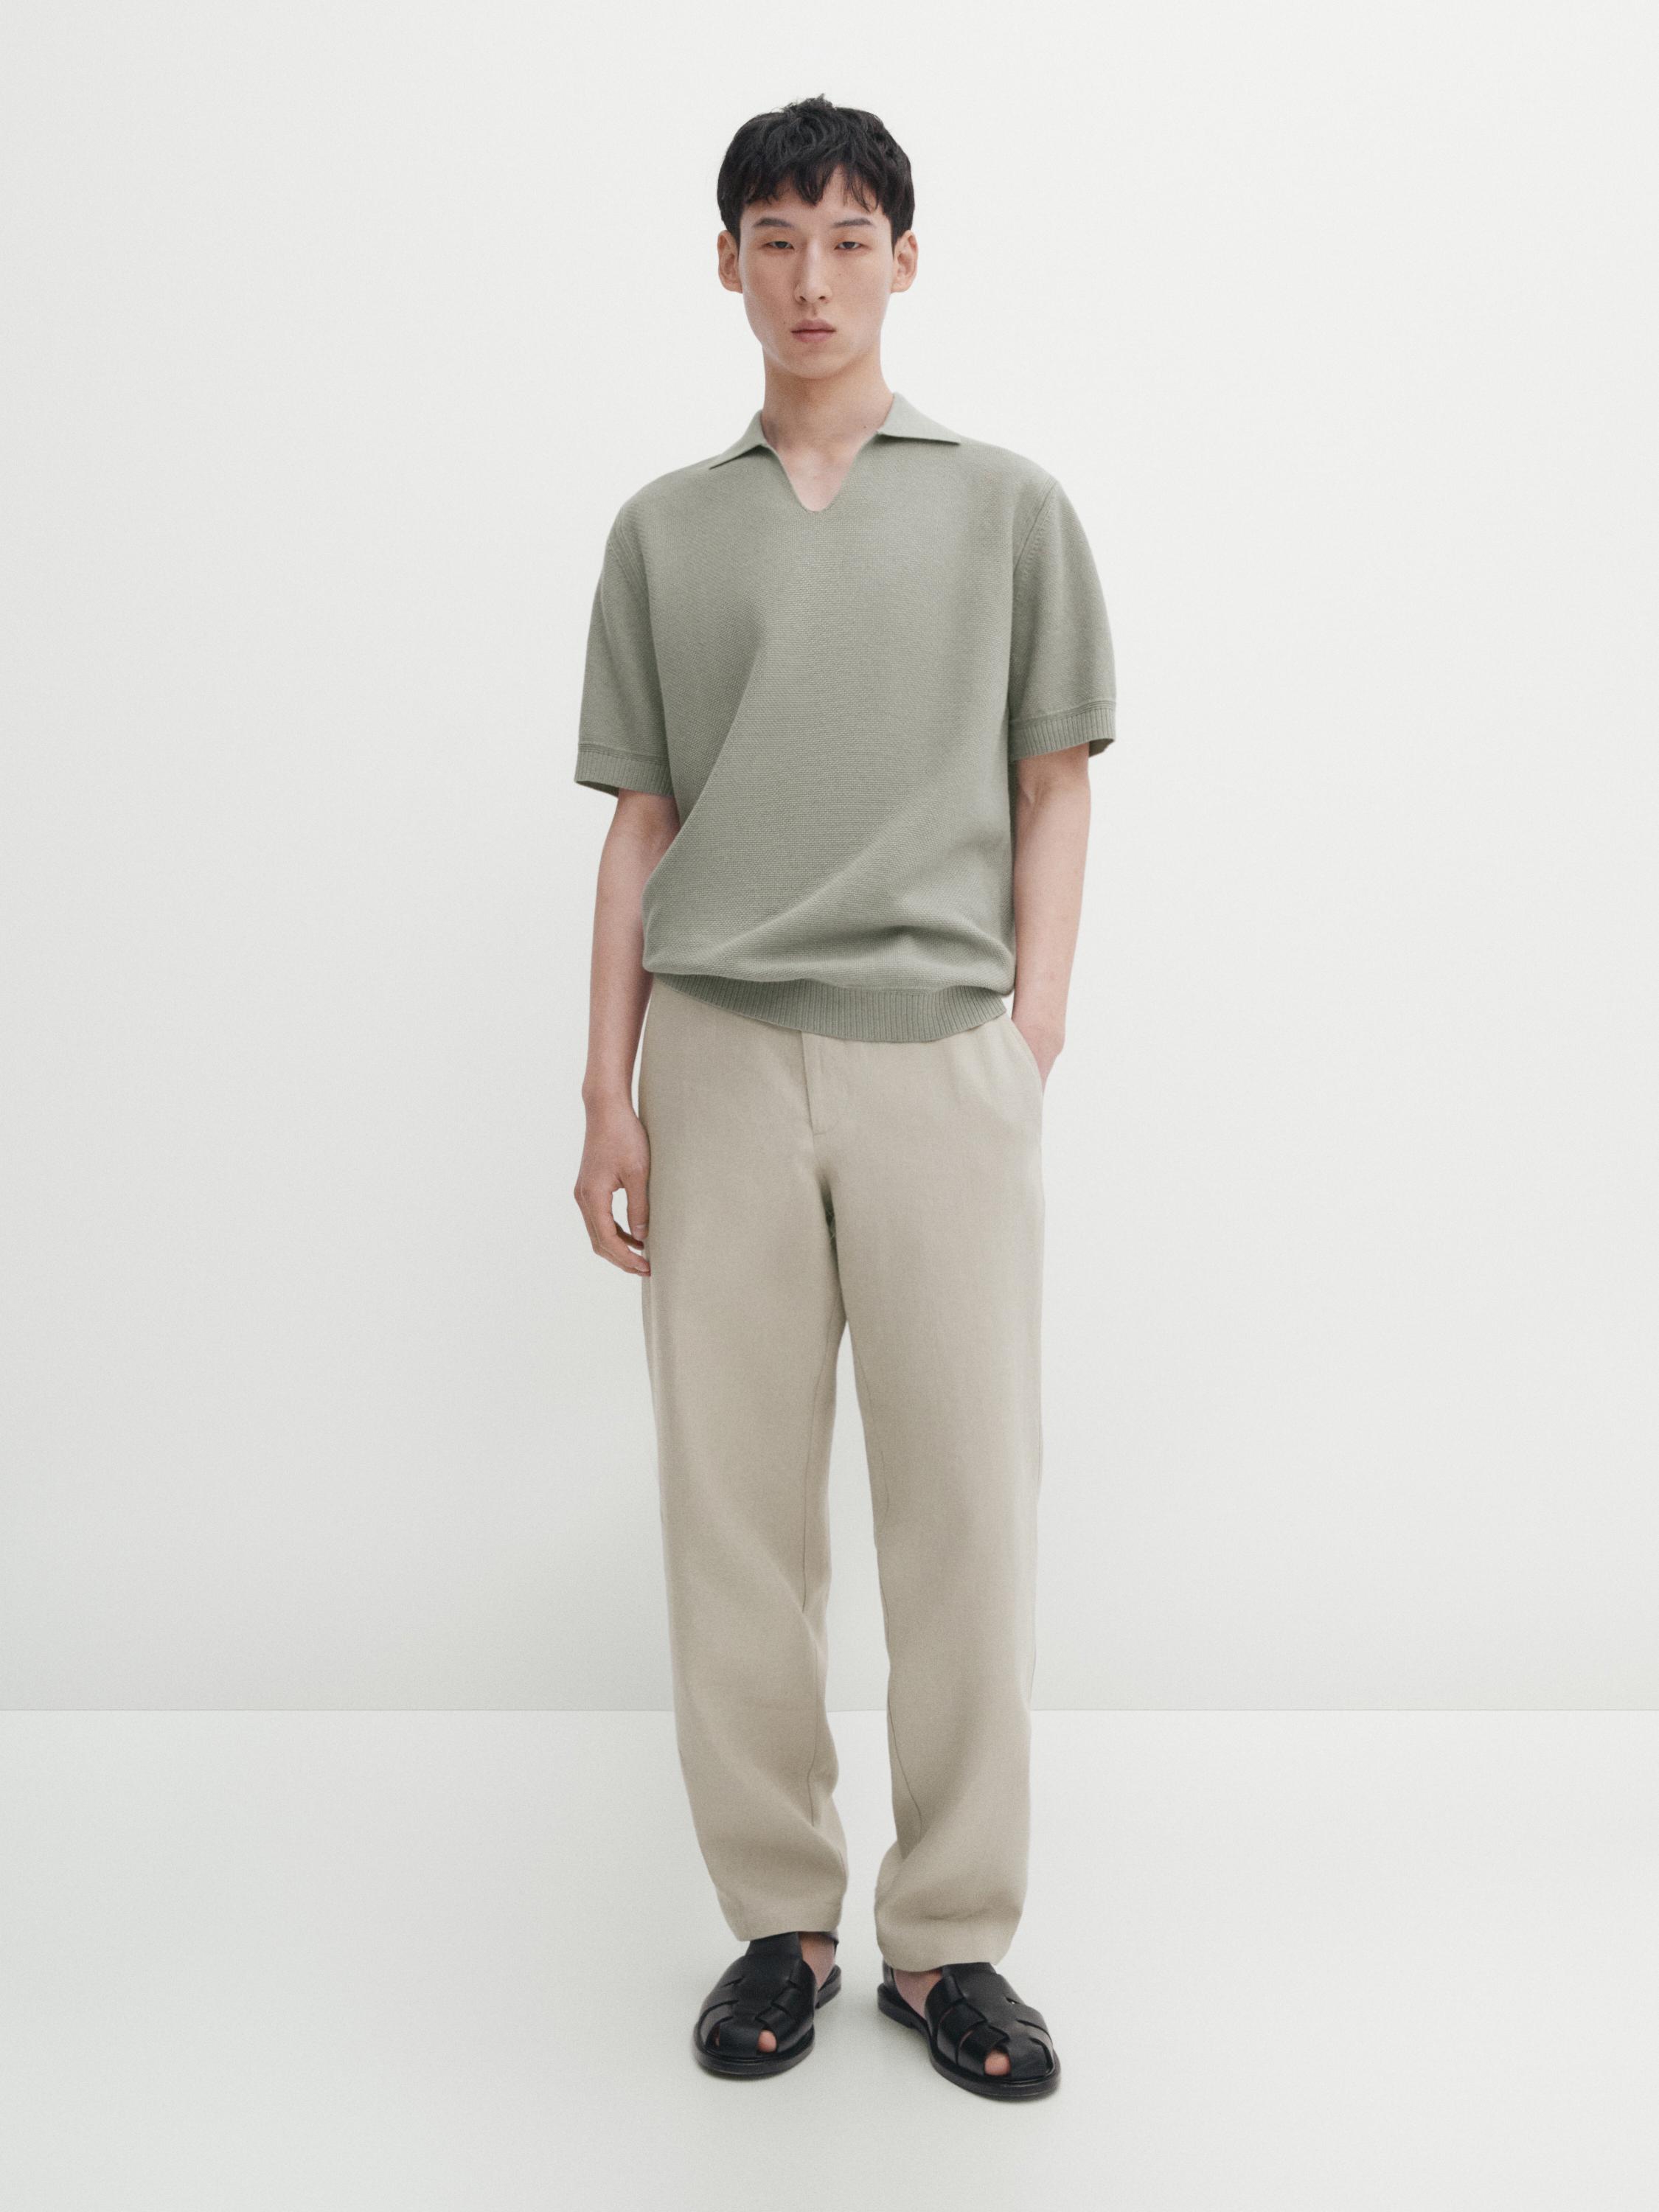 Knit polo sweater with short sleeves - Stone | ZARA United States